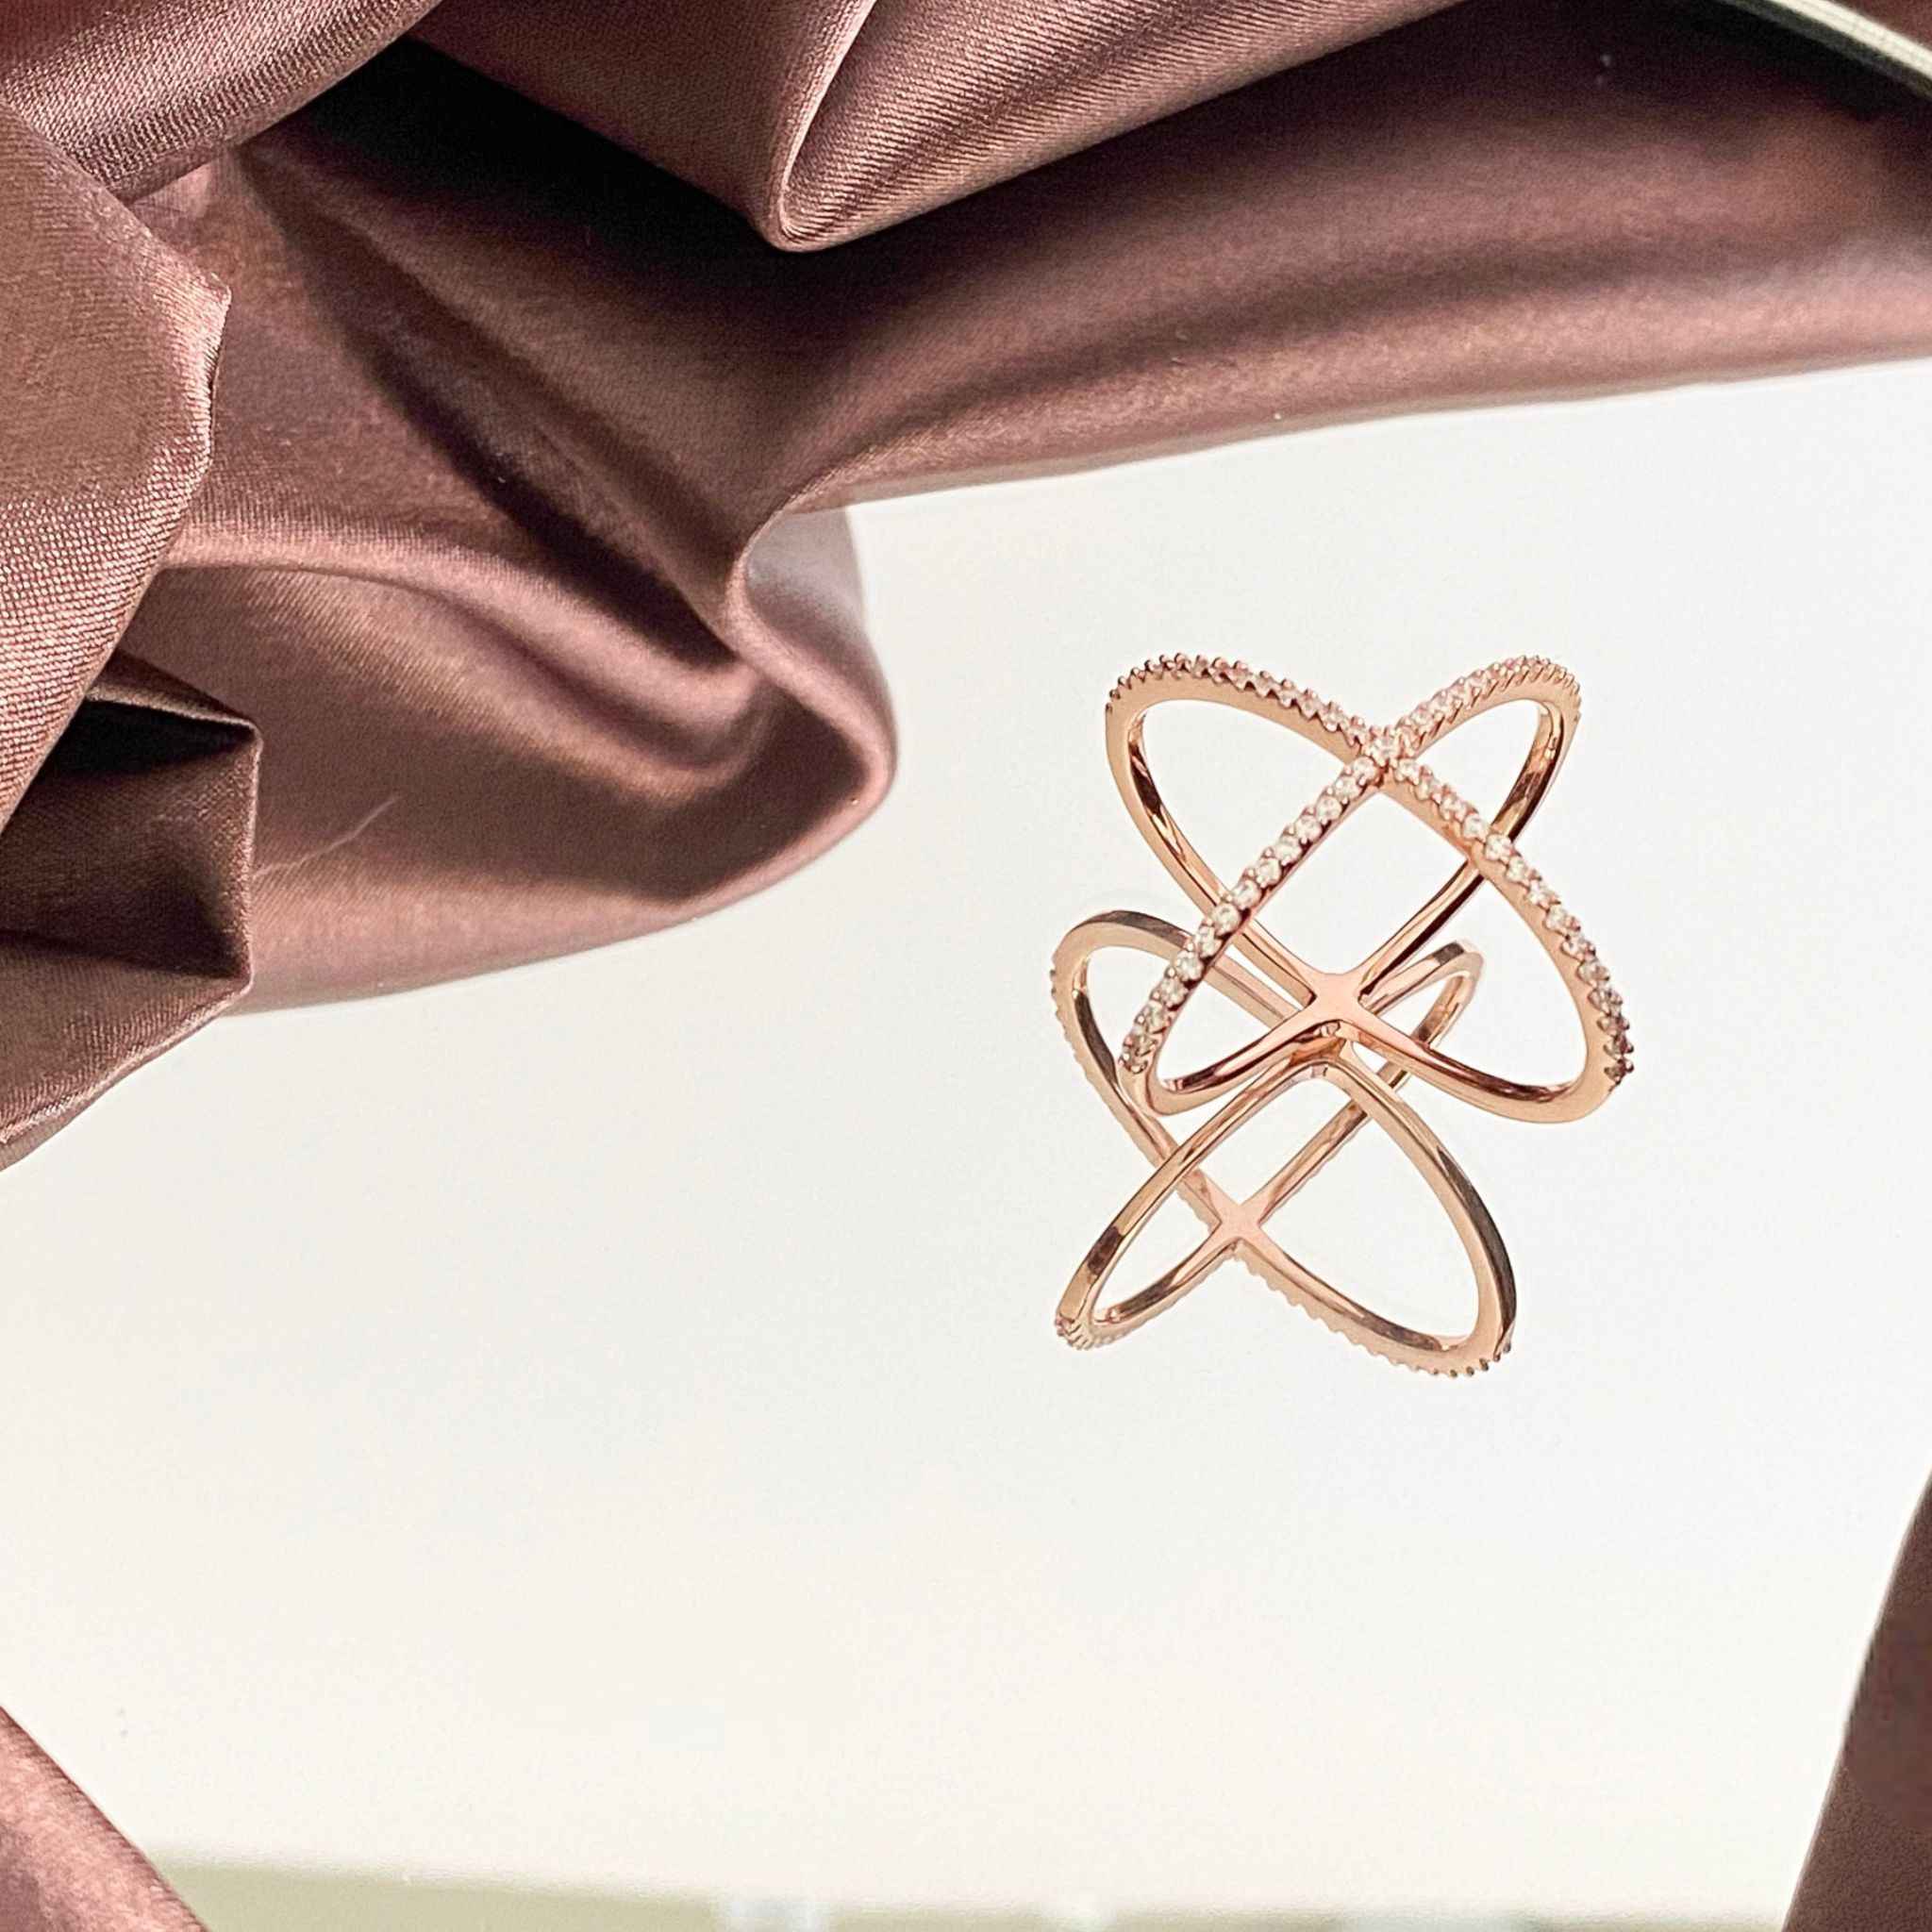 Close-up view of Waverly Cross Ring in Rose Gold showcasing its intricate design and shimmering stones.